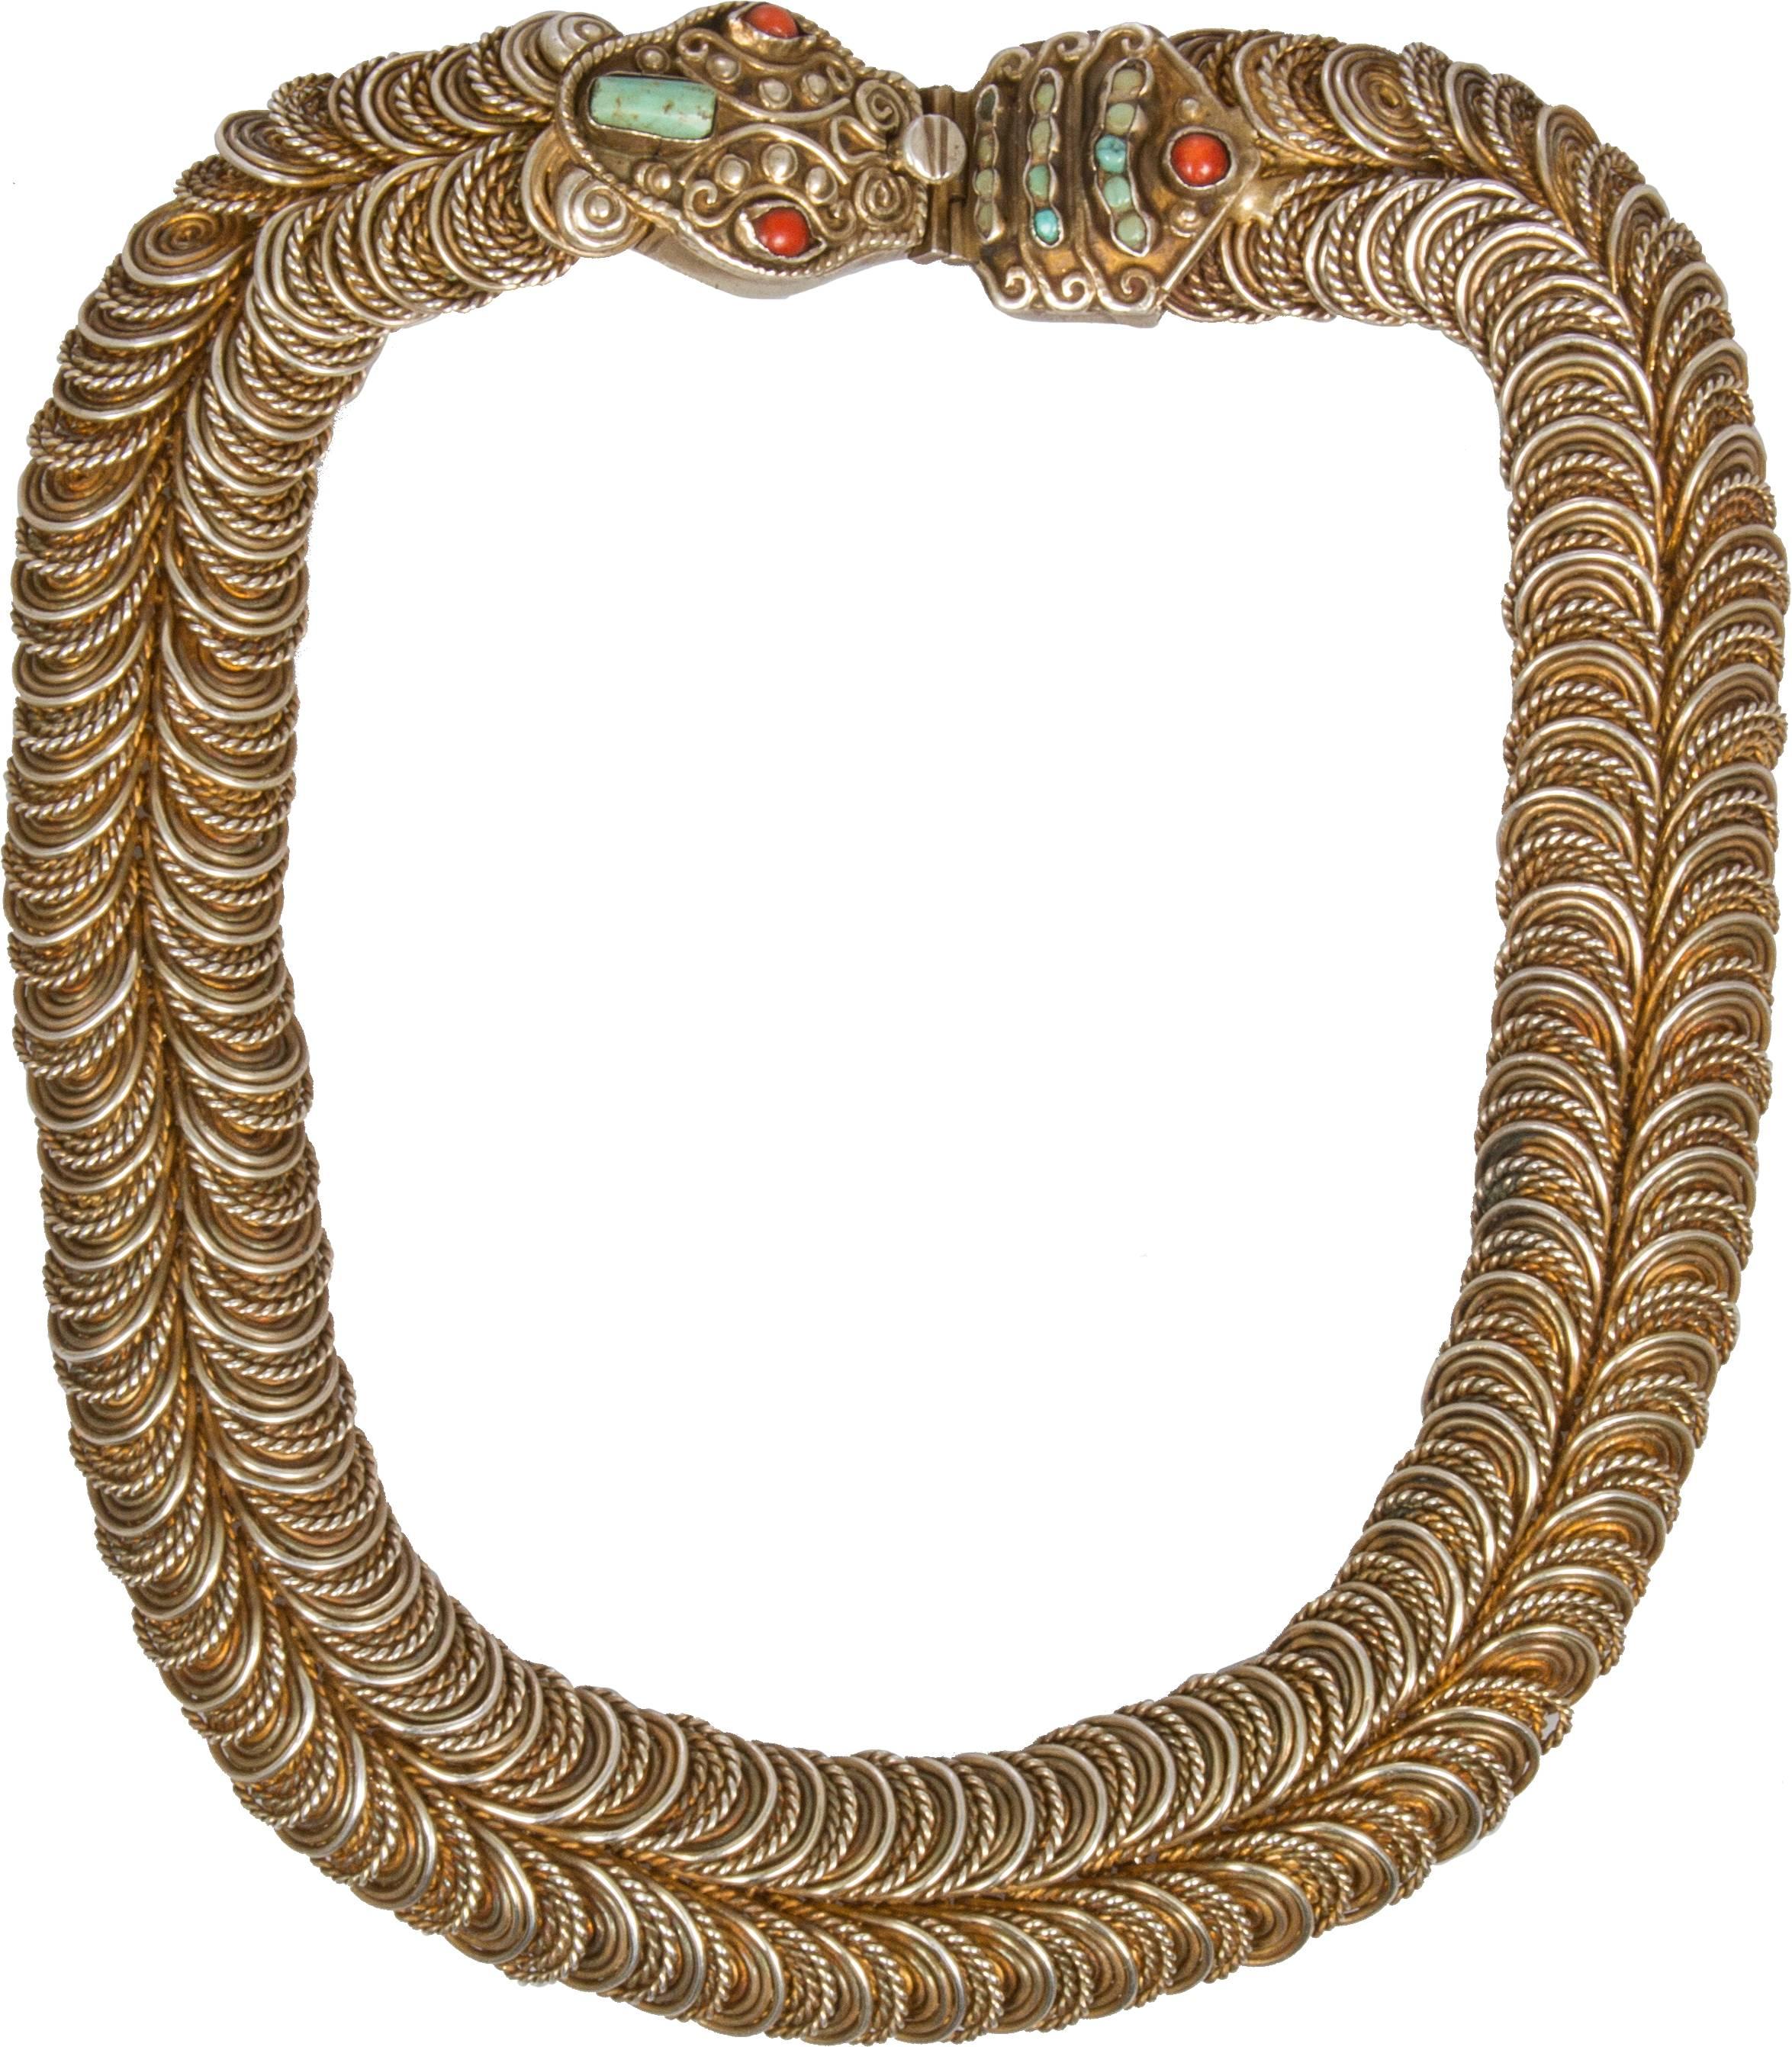 This is a wonderful necklace by Matilde Poulat.  The necklace is composed of gilt silver scales and turquoise